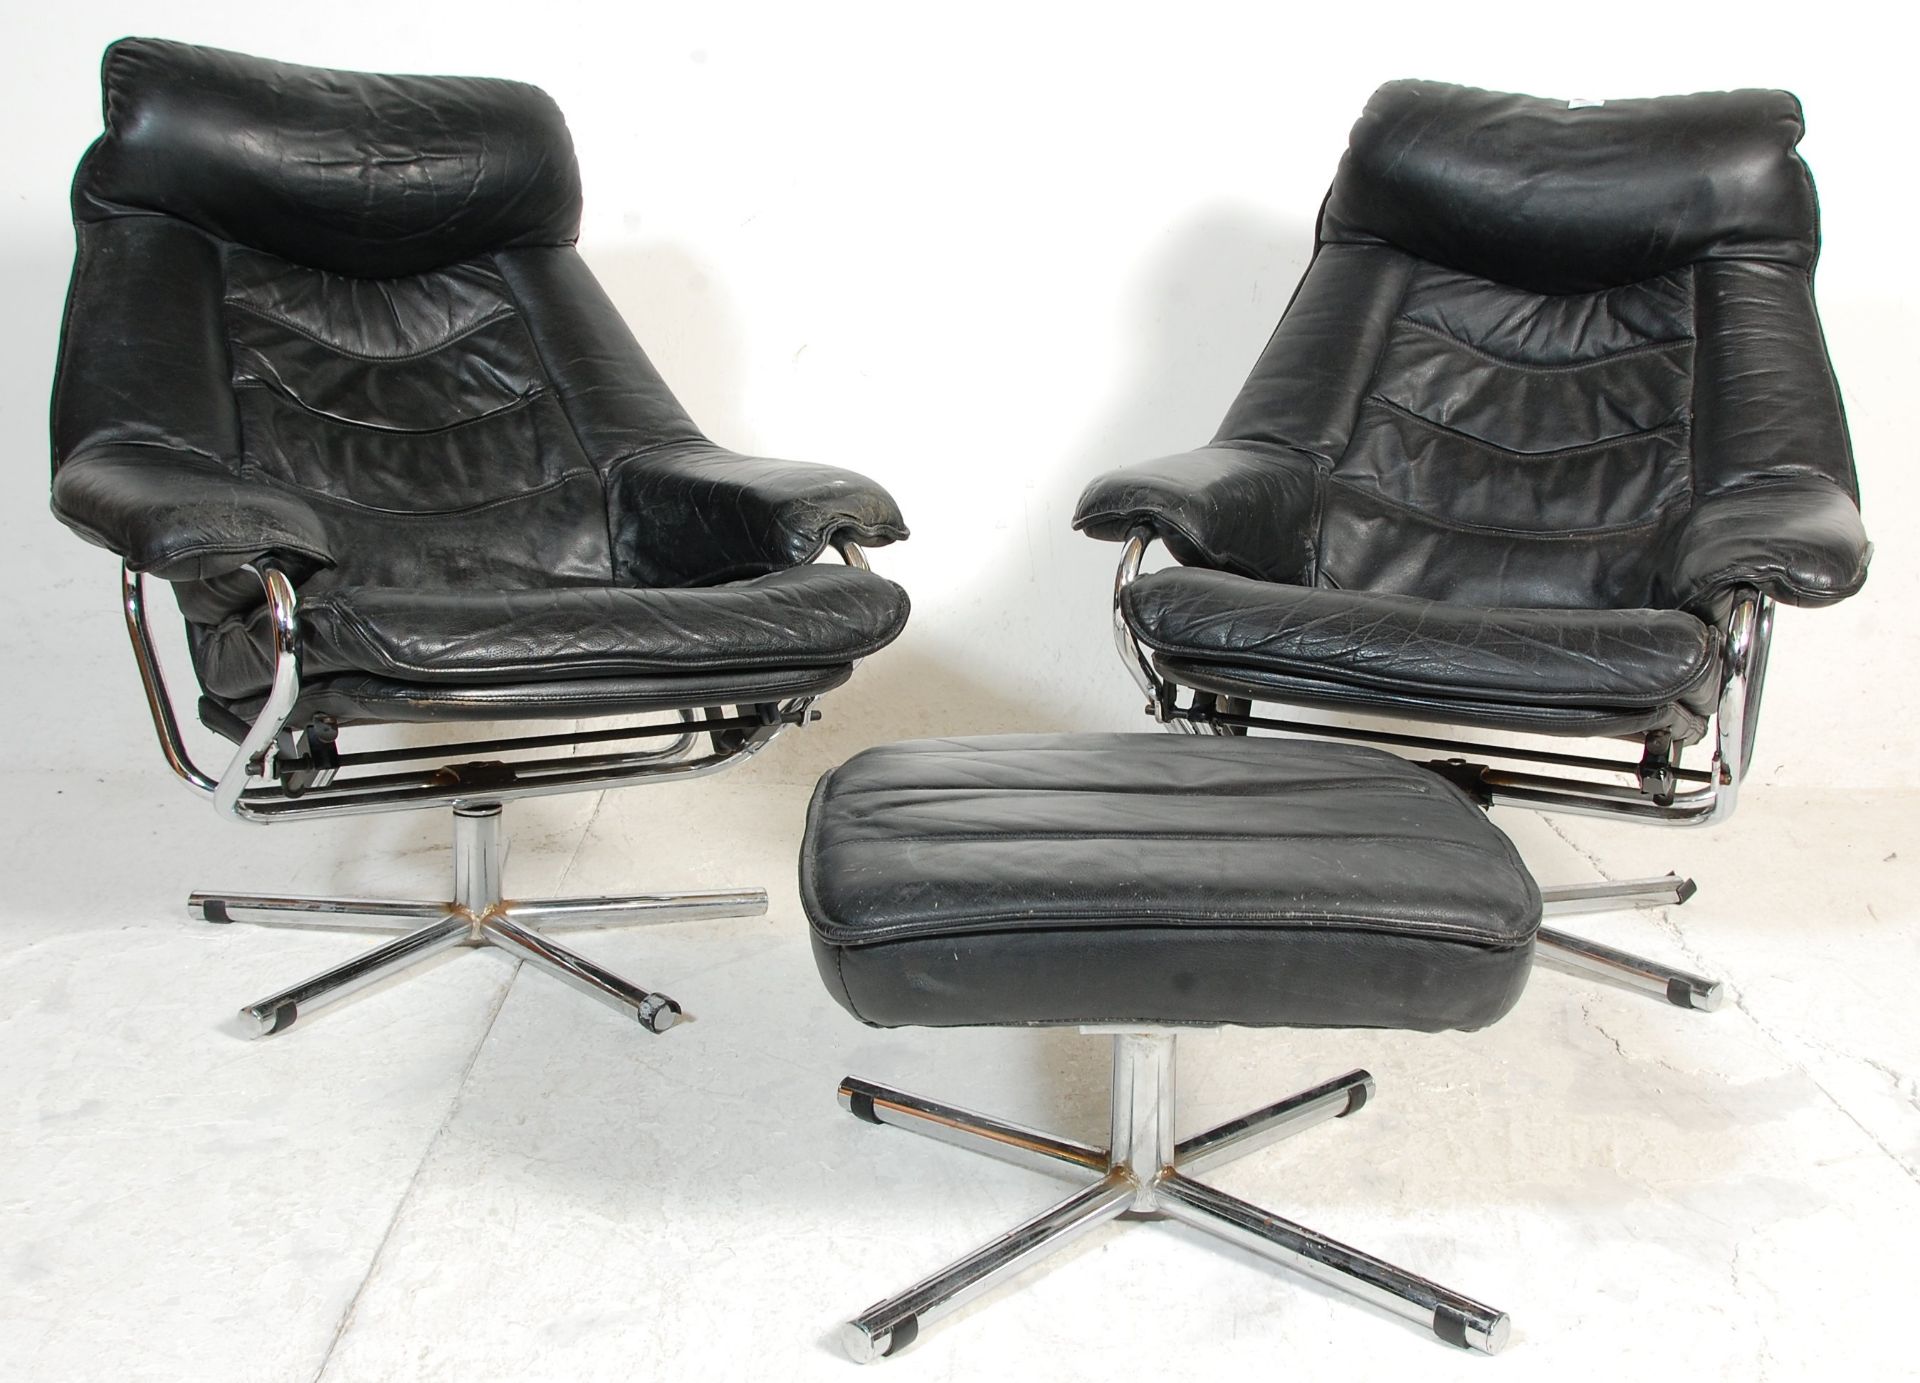 A pair of vintage retro 1970's Swedish black leather arm / lounge chairs, each raised on chrome